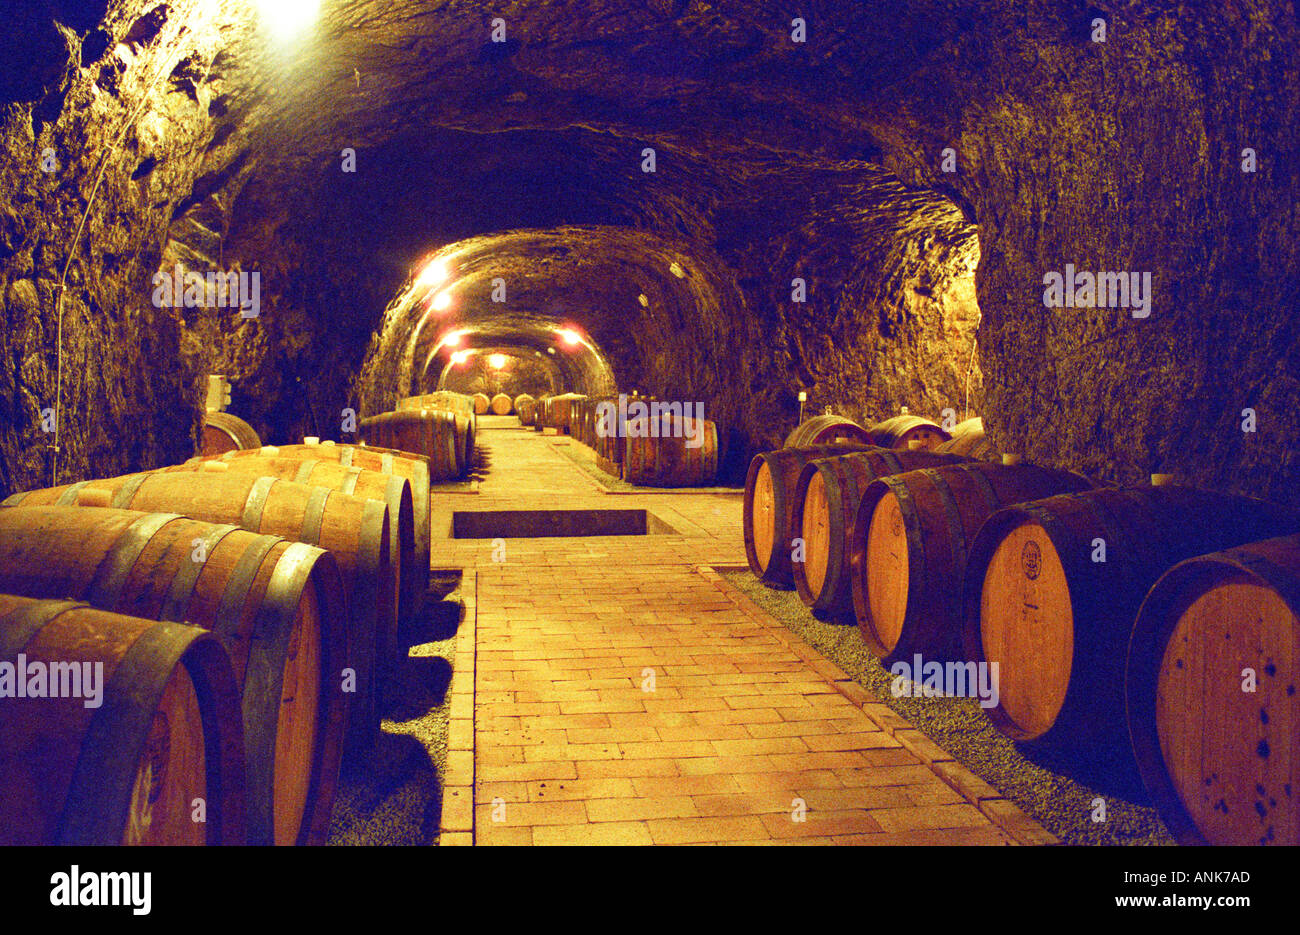 The Chateau Dereszla winery: the underground cellar. A tunnel with barrels of Tokaji wine. Stock Photo